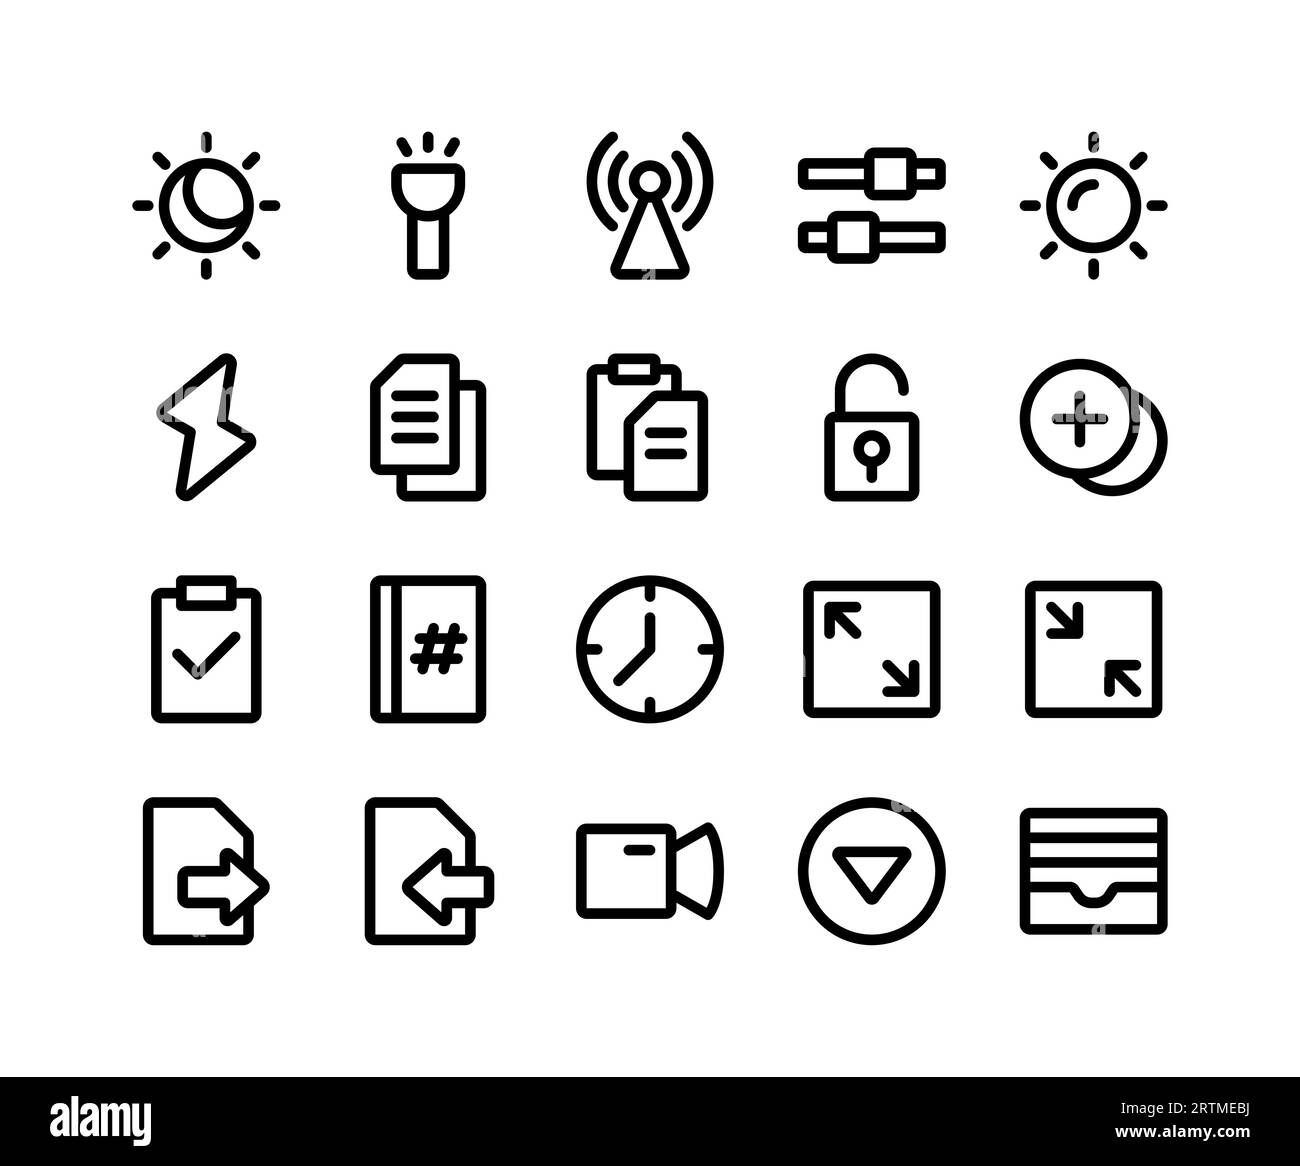 User interface icons for any purpose, Perfect for website and ui design. Stock Vector